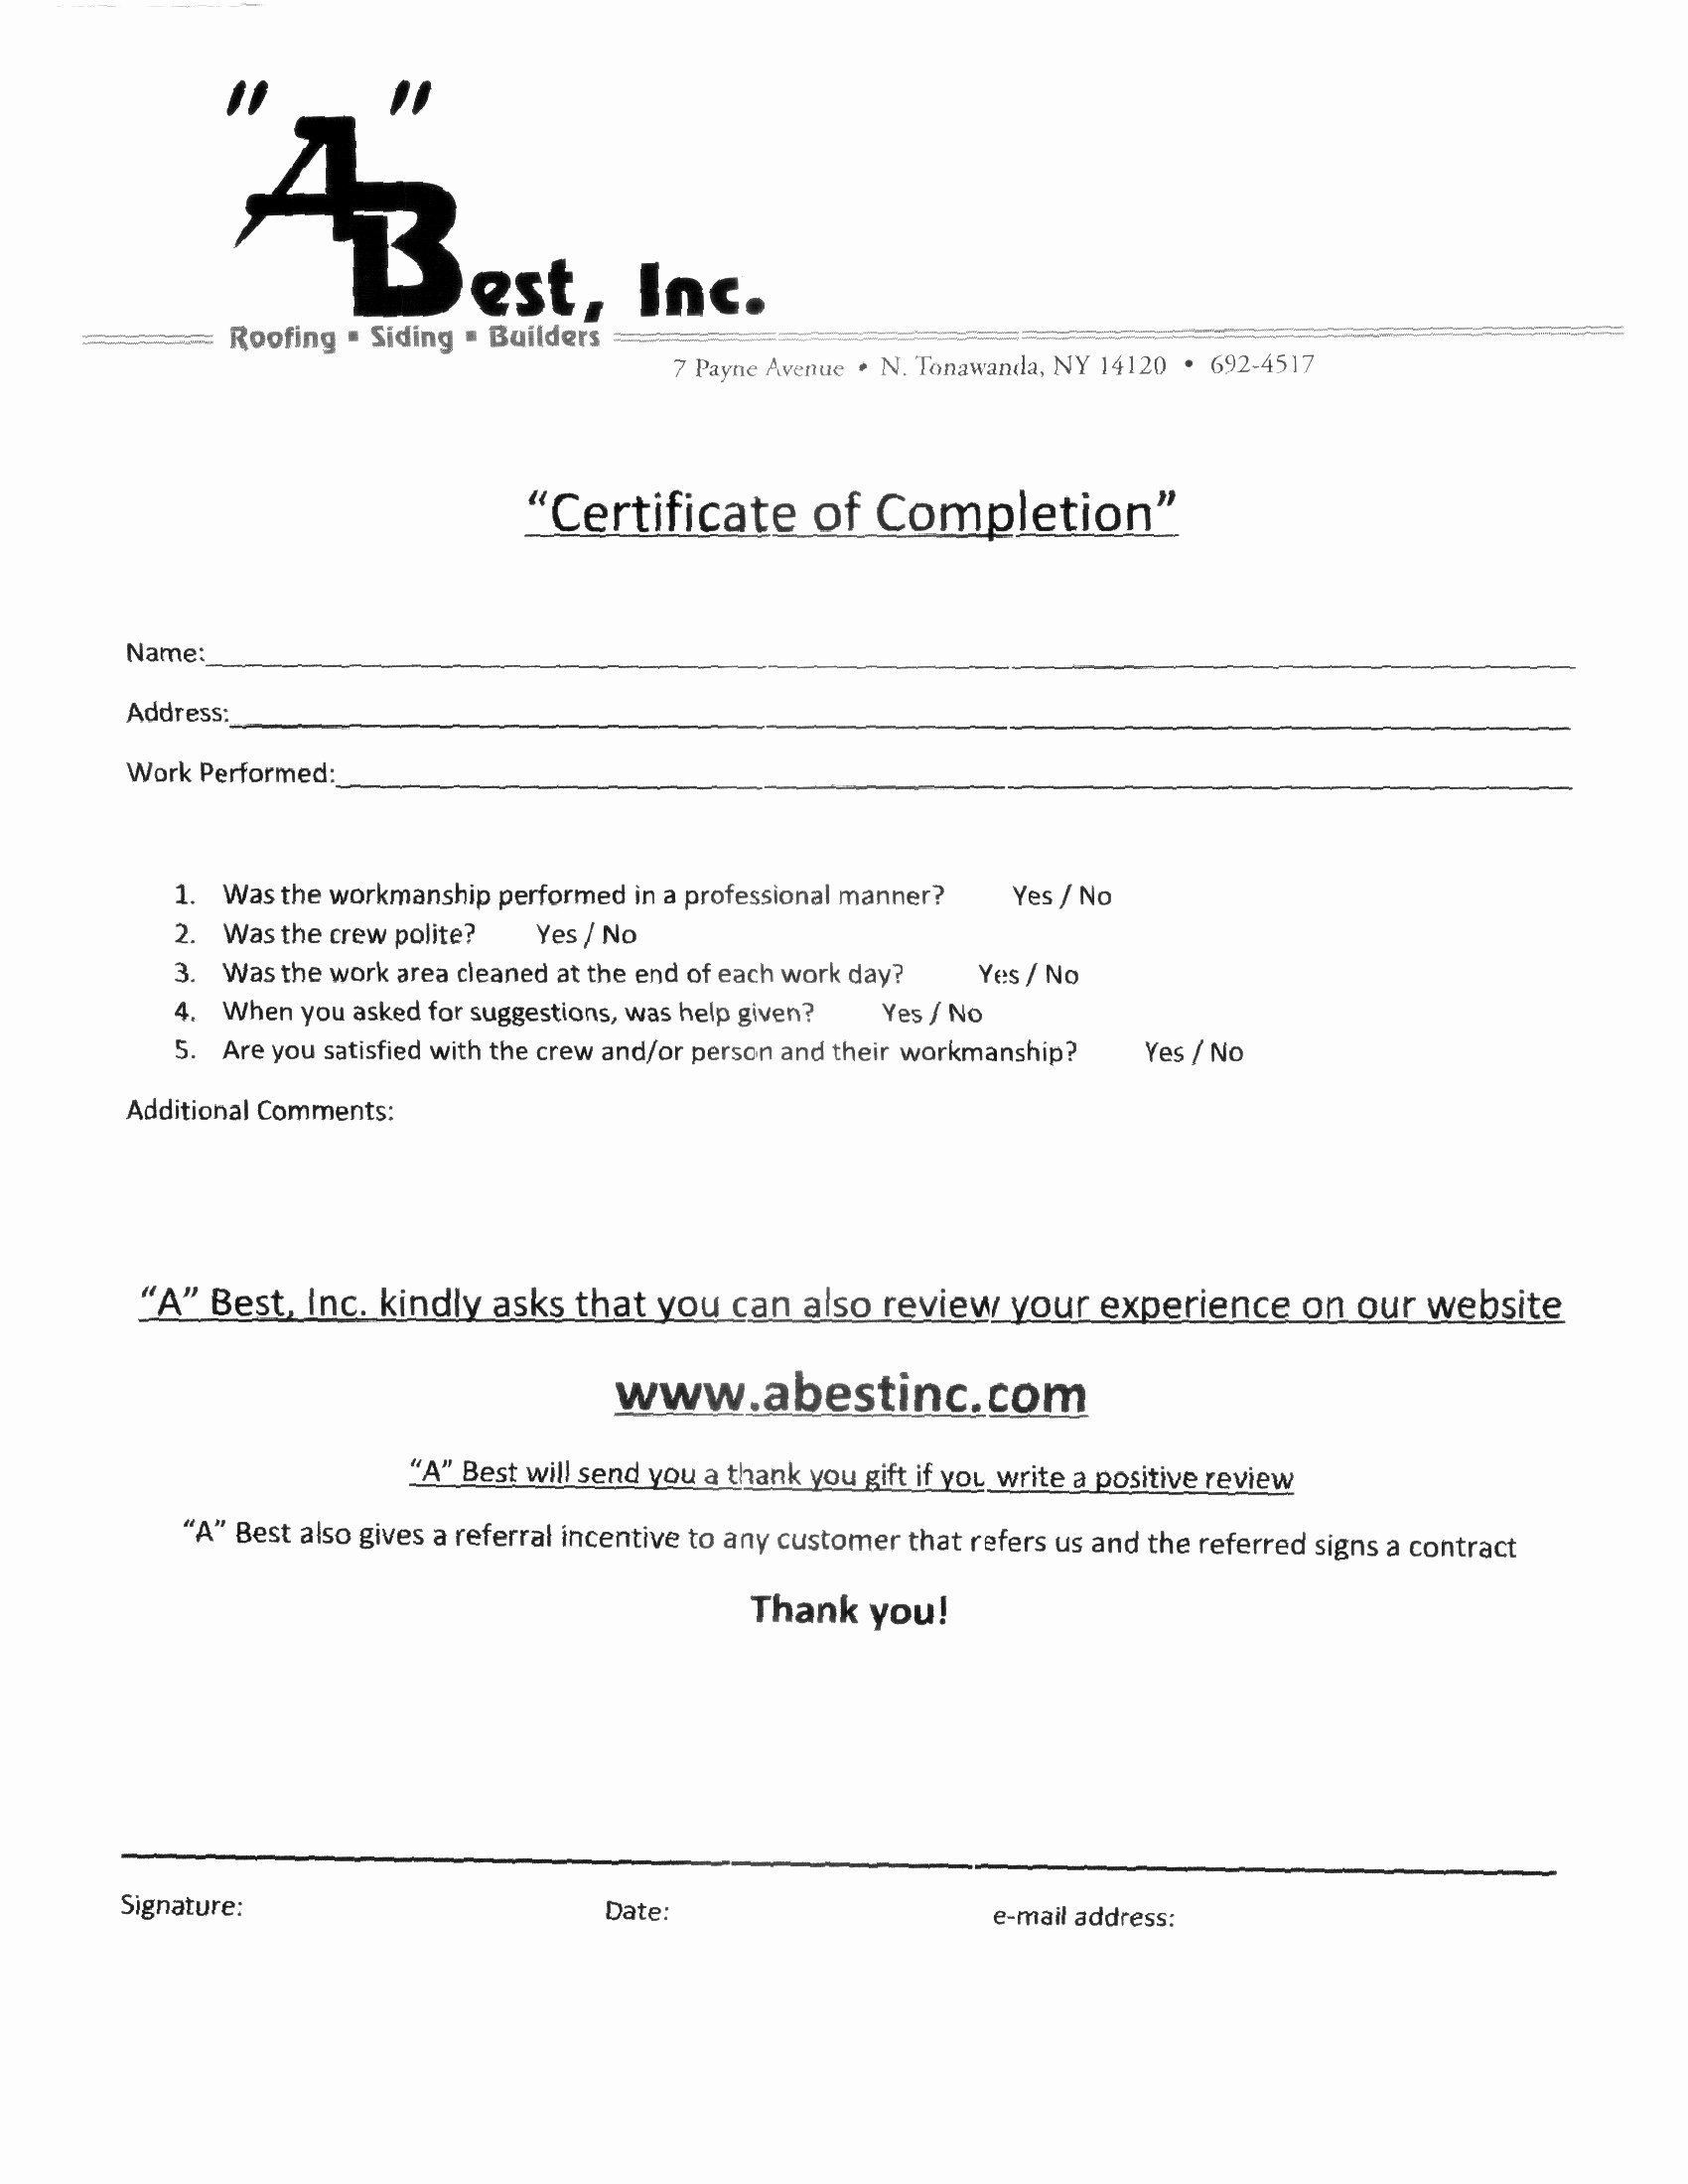 Roofing Certificate Of Completion Template Fresh A Best Inc